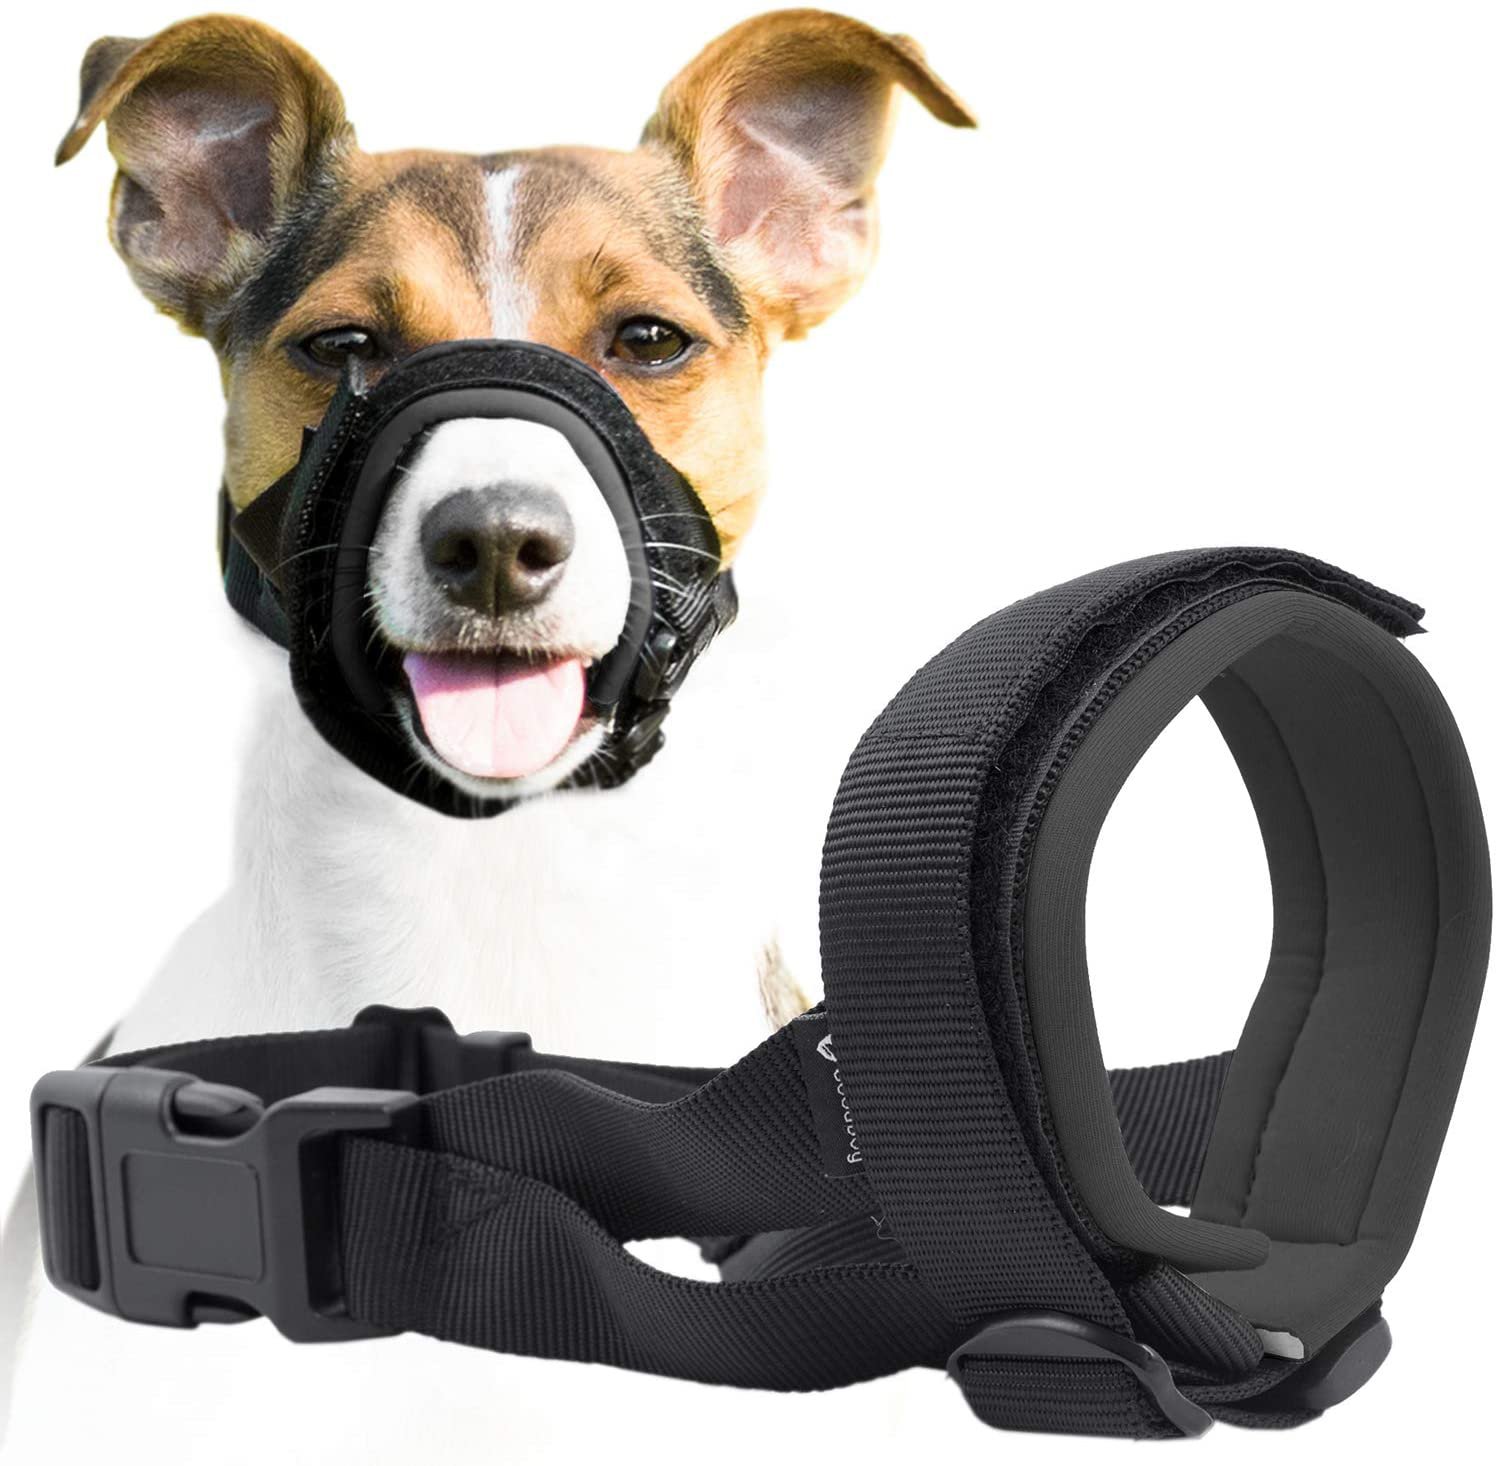 muzzle training to stop chewing